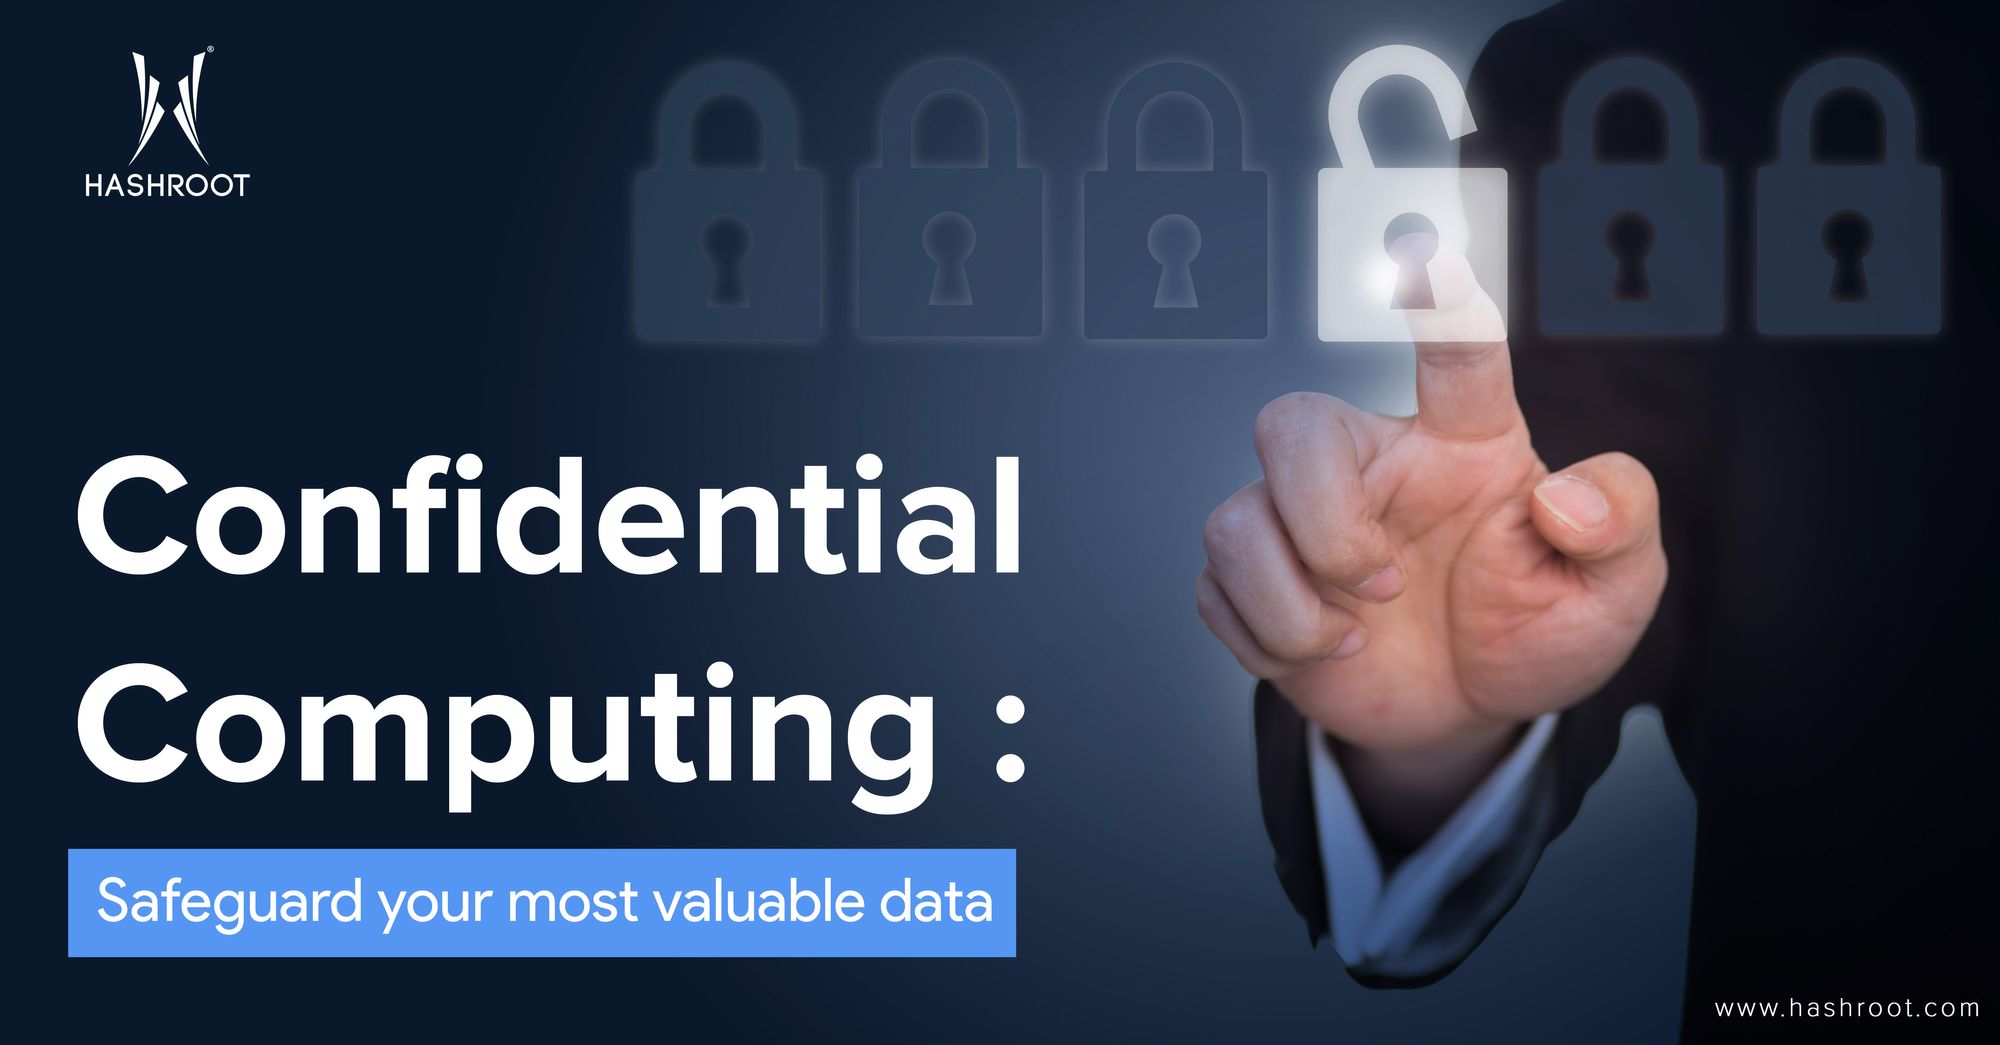 Confidential Computing: Safeguard your most valuable data